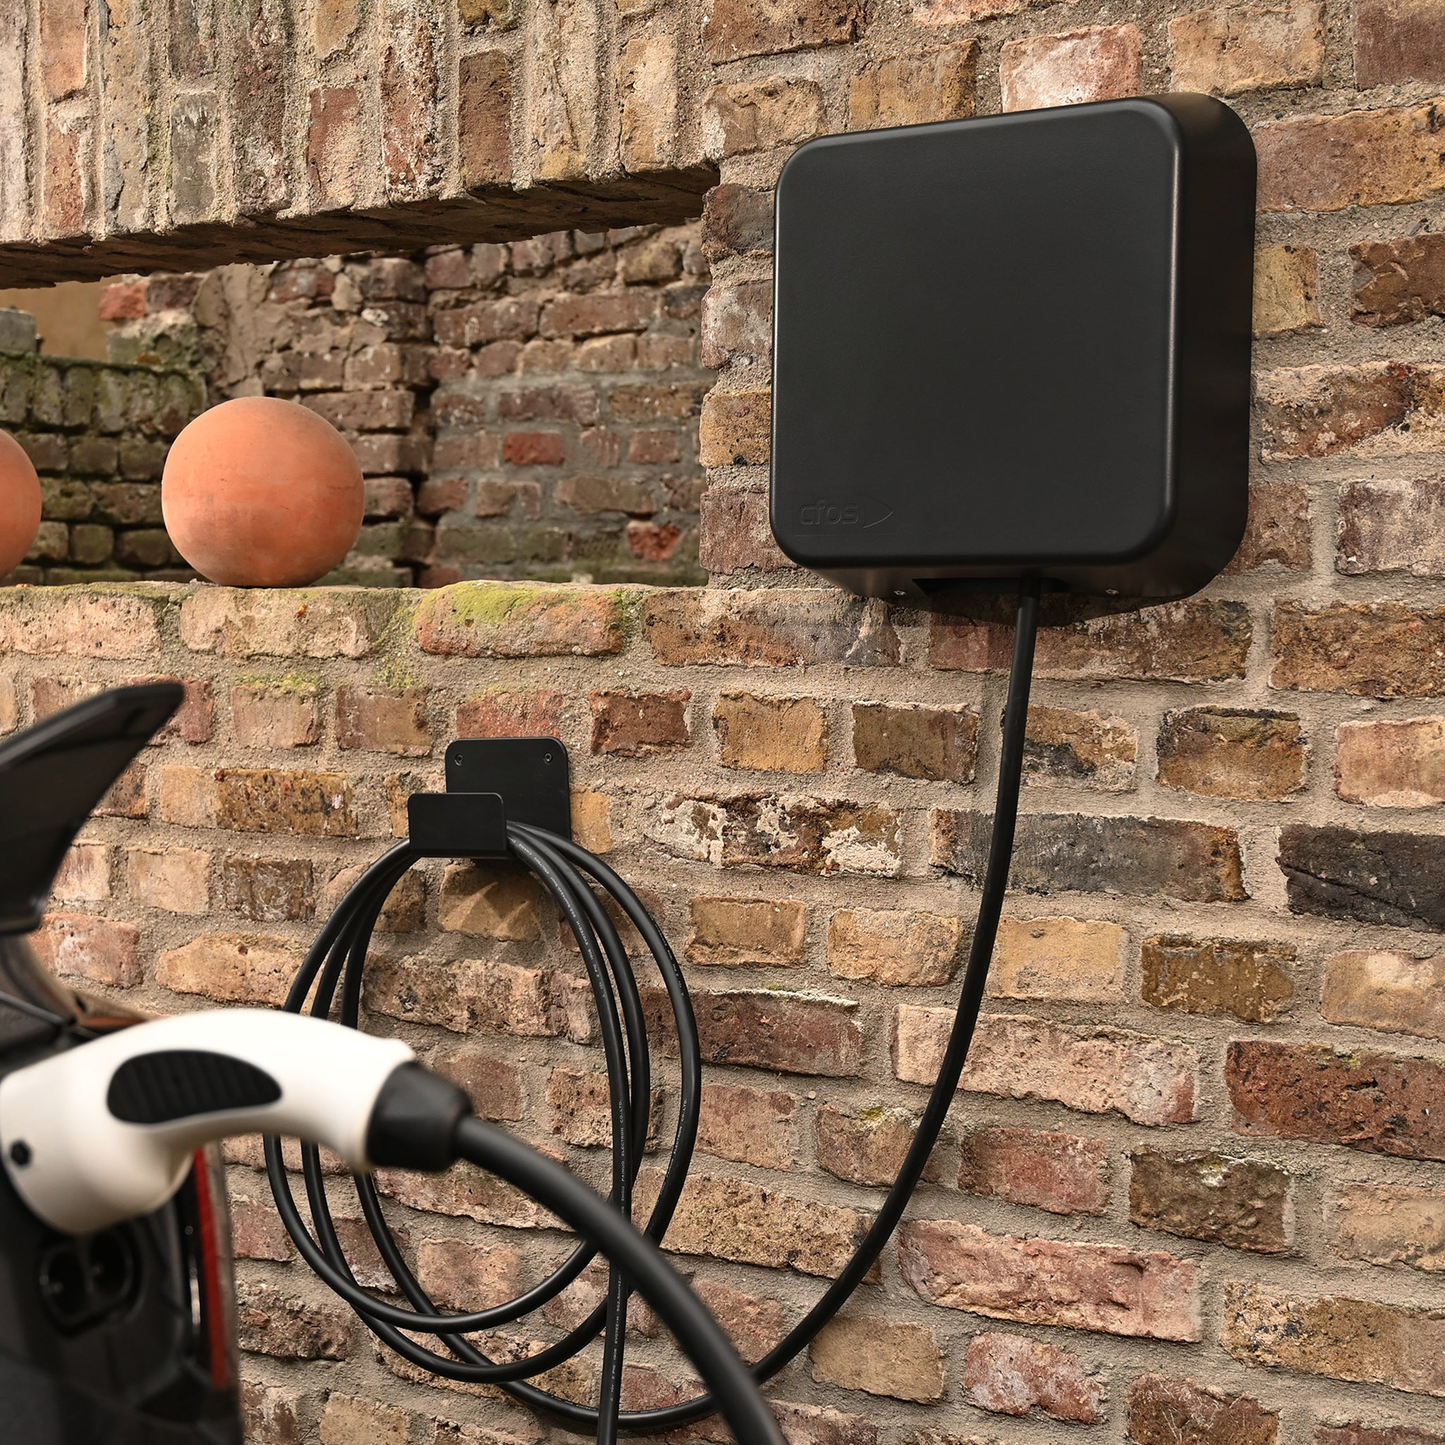 The picture is showing a cfos emobility wallbox ng mounted on a brickwall. The attached type two charging plug is charging a car. The cable has a length of seven meters and is rolled up on the cable-holder that is included in the product.